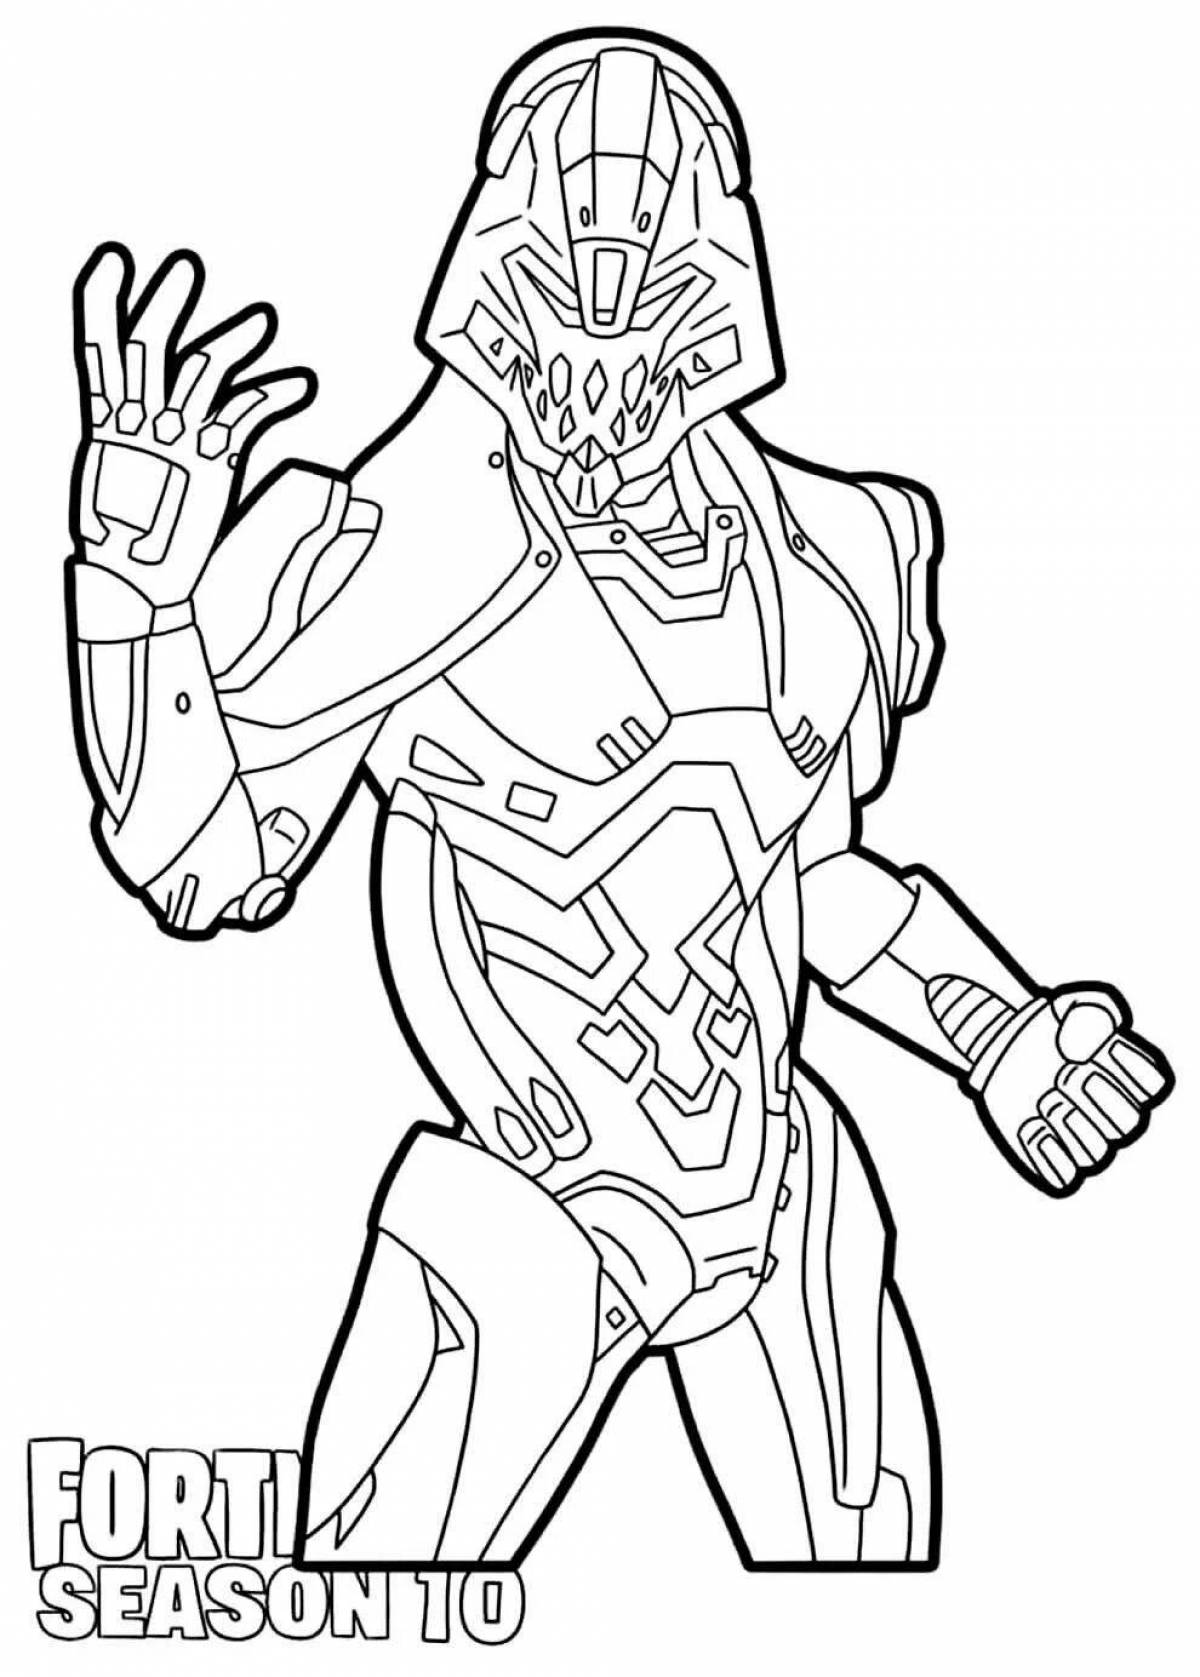 Luxury ford knight coloring page